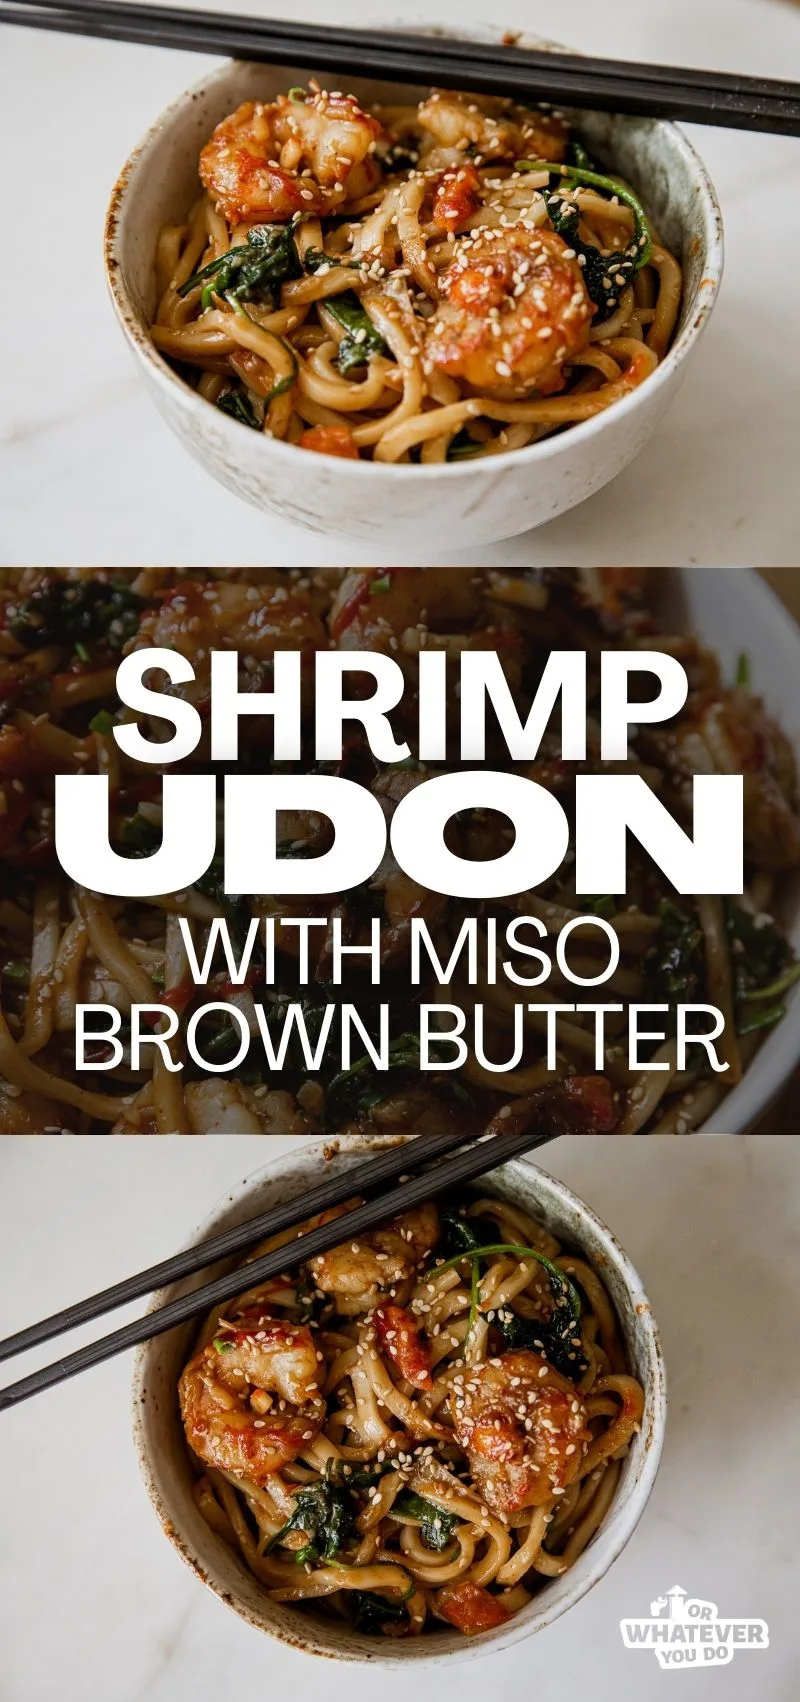 Shrimp Udon with Miso Brown Butter